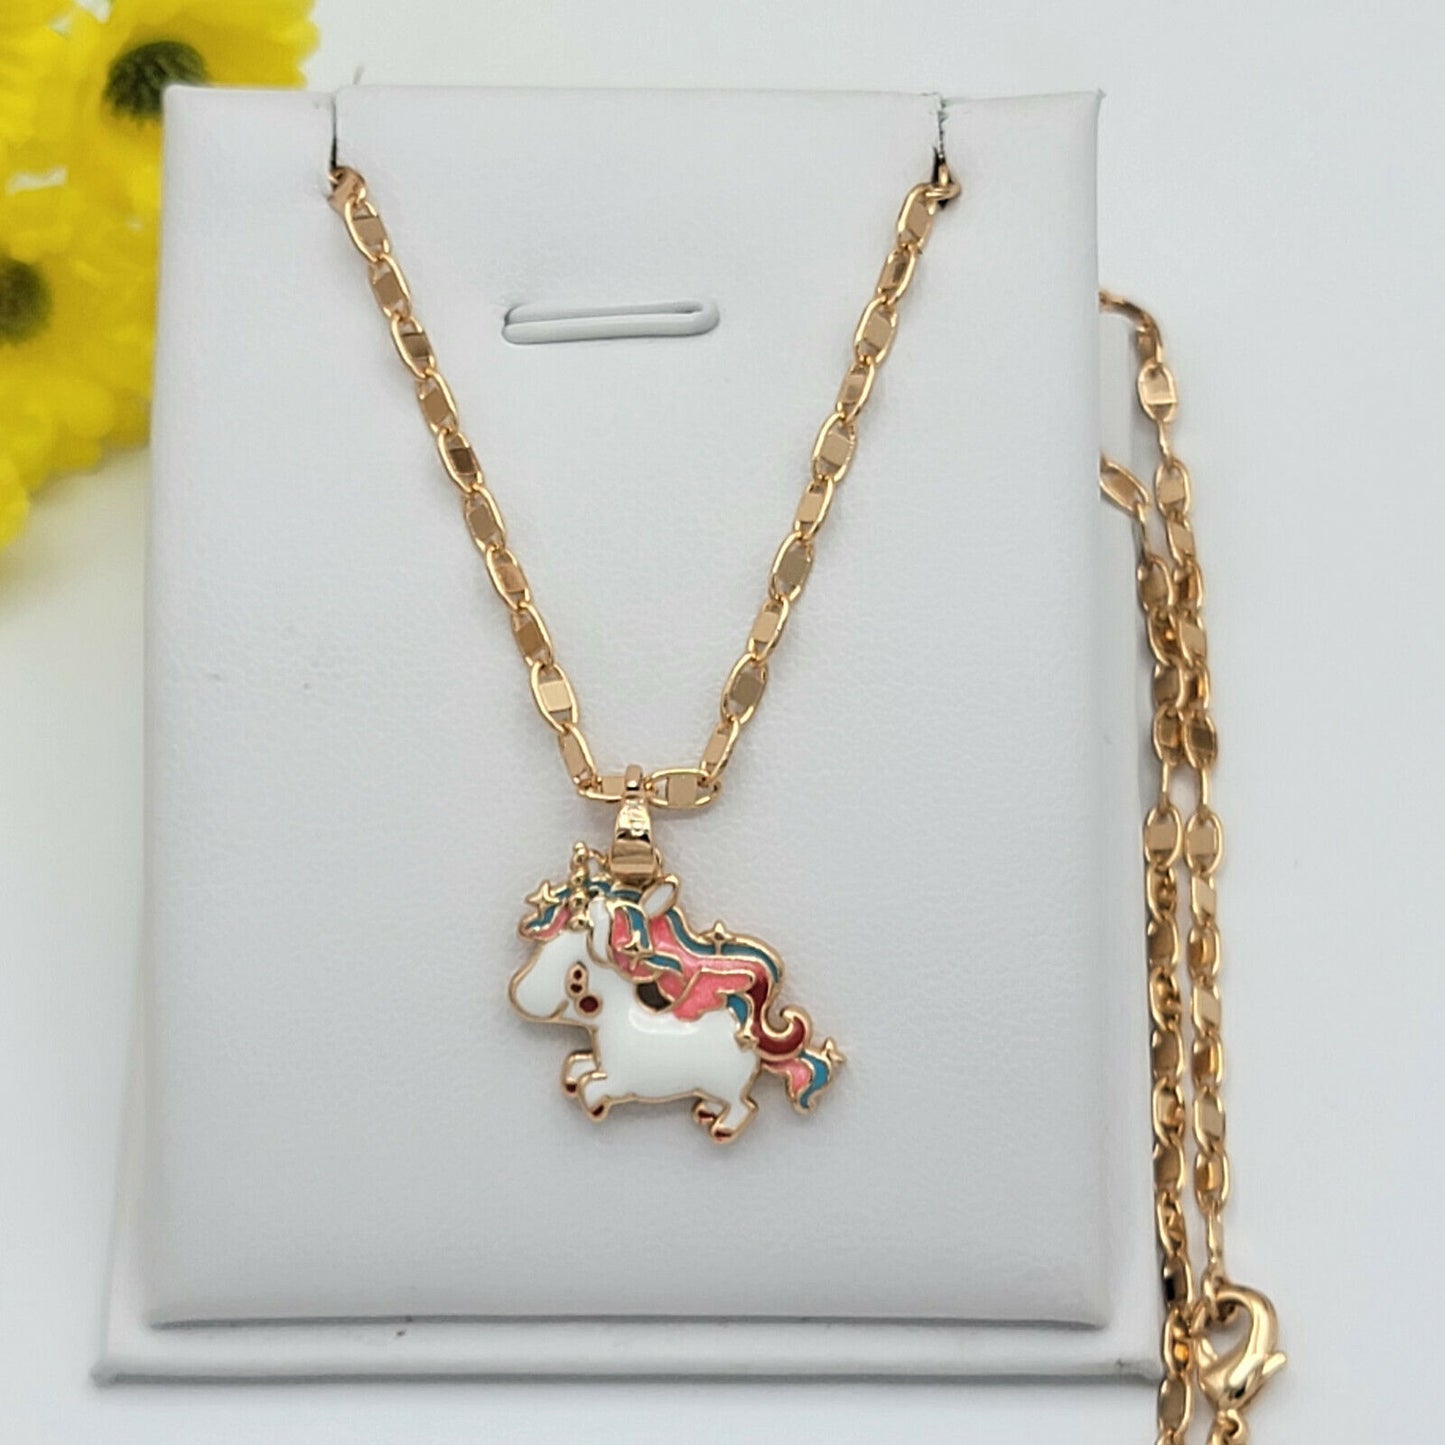 Necklaces - 18K Gold Plated. Unicorn Pendant & Chain.